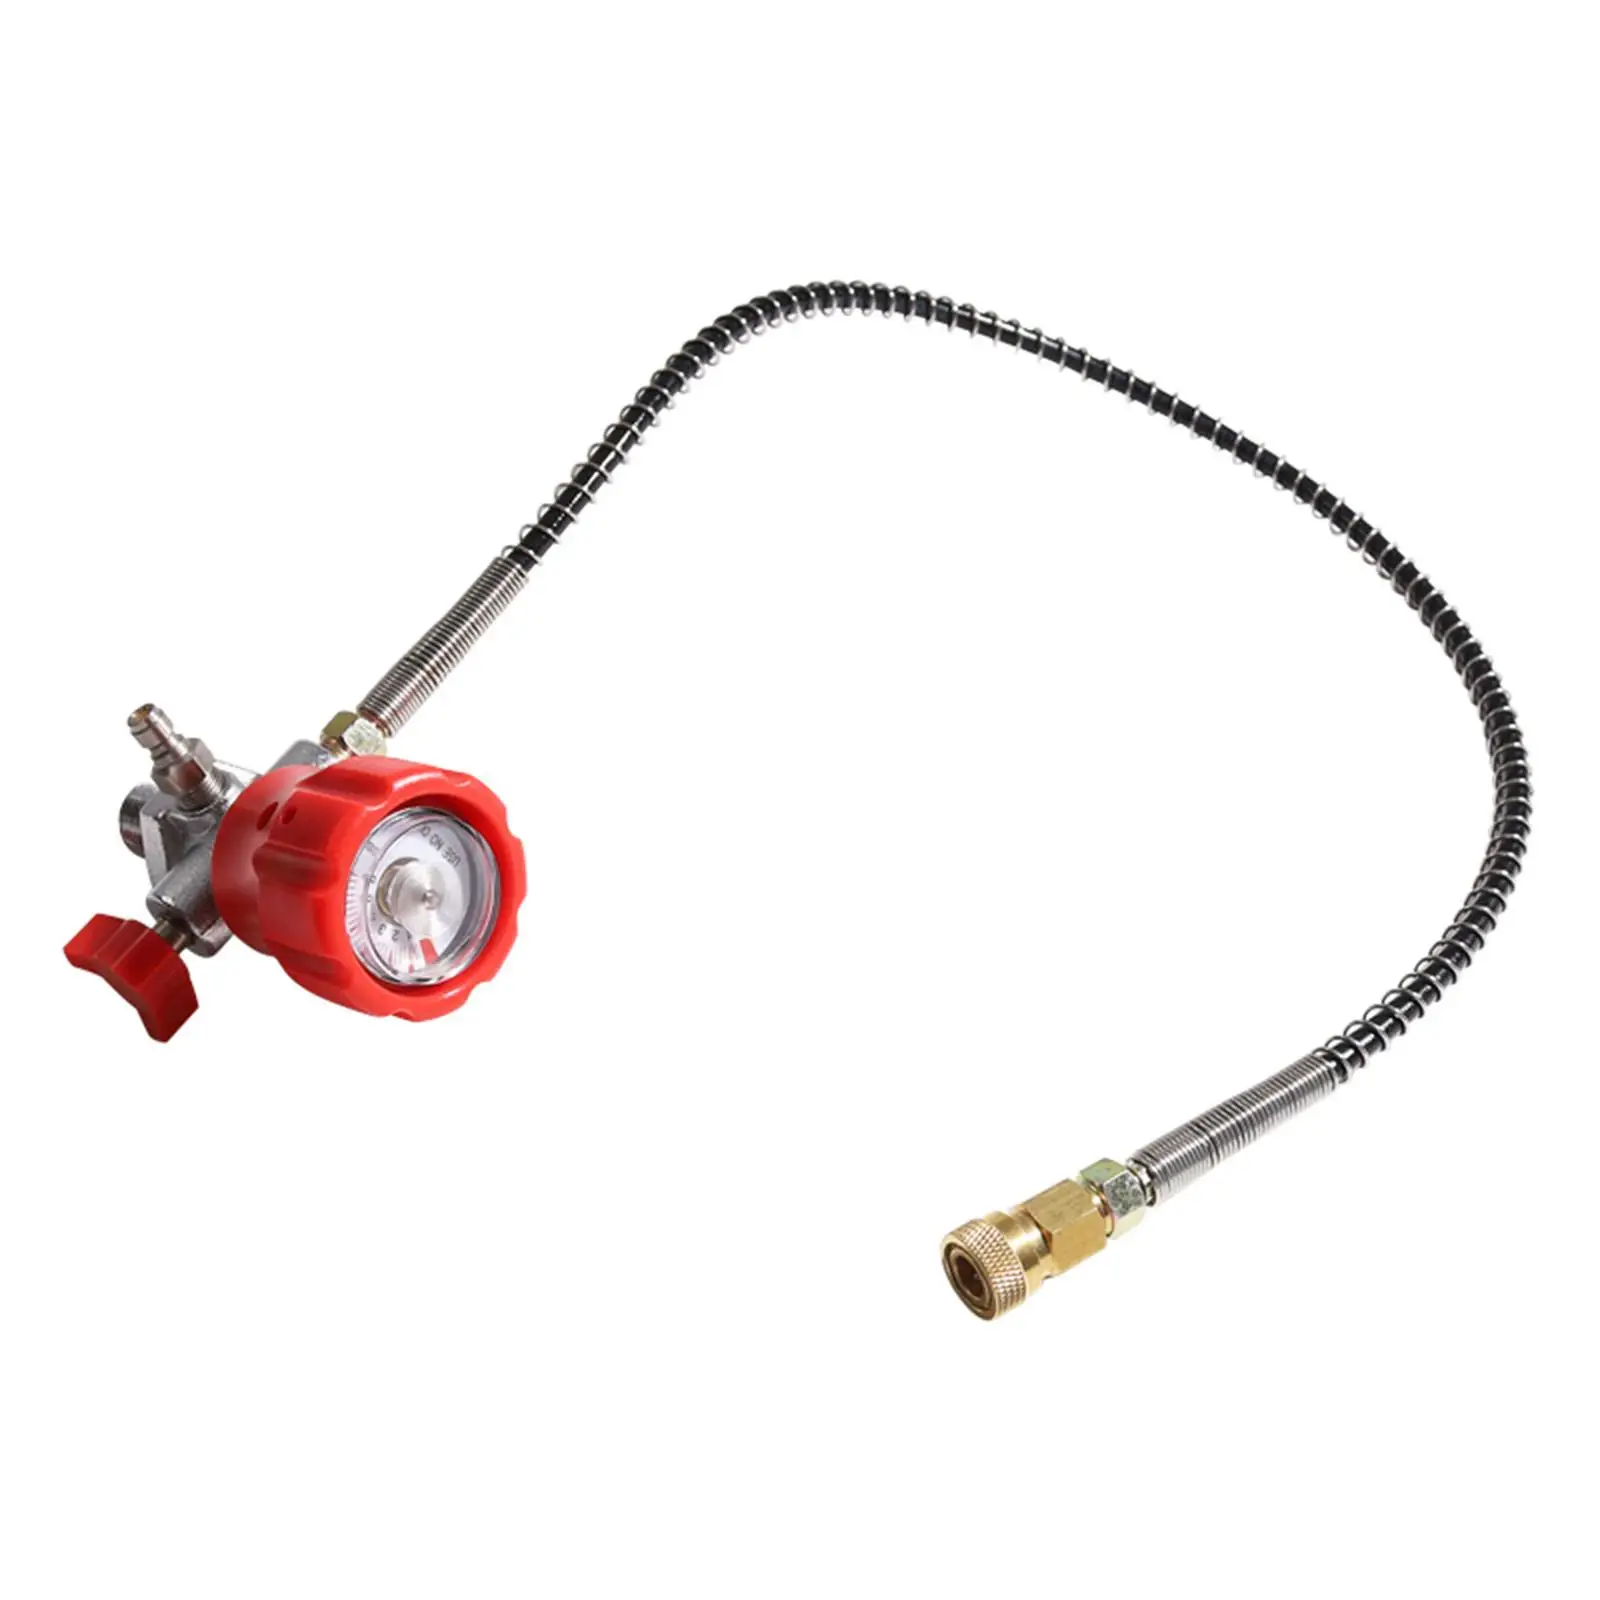 High Pressure Fill Station Charging Adapter with 24inch Hose Tube Pipe Connection Tank Refill Adapter for Scuba Diving Tank